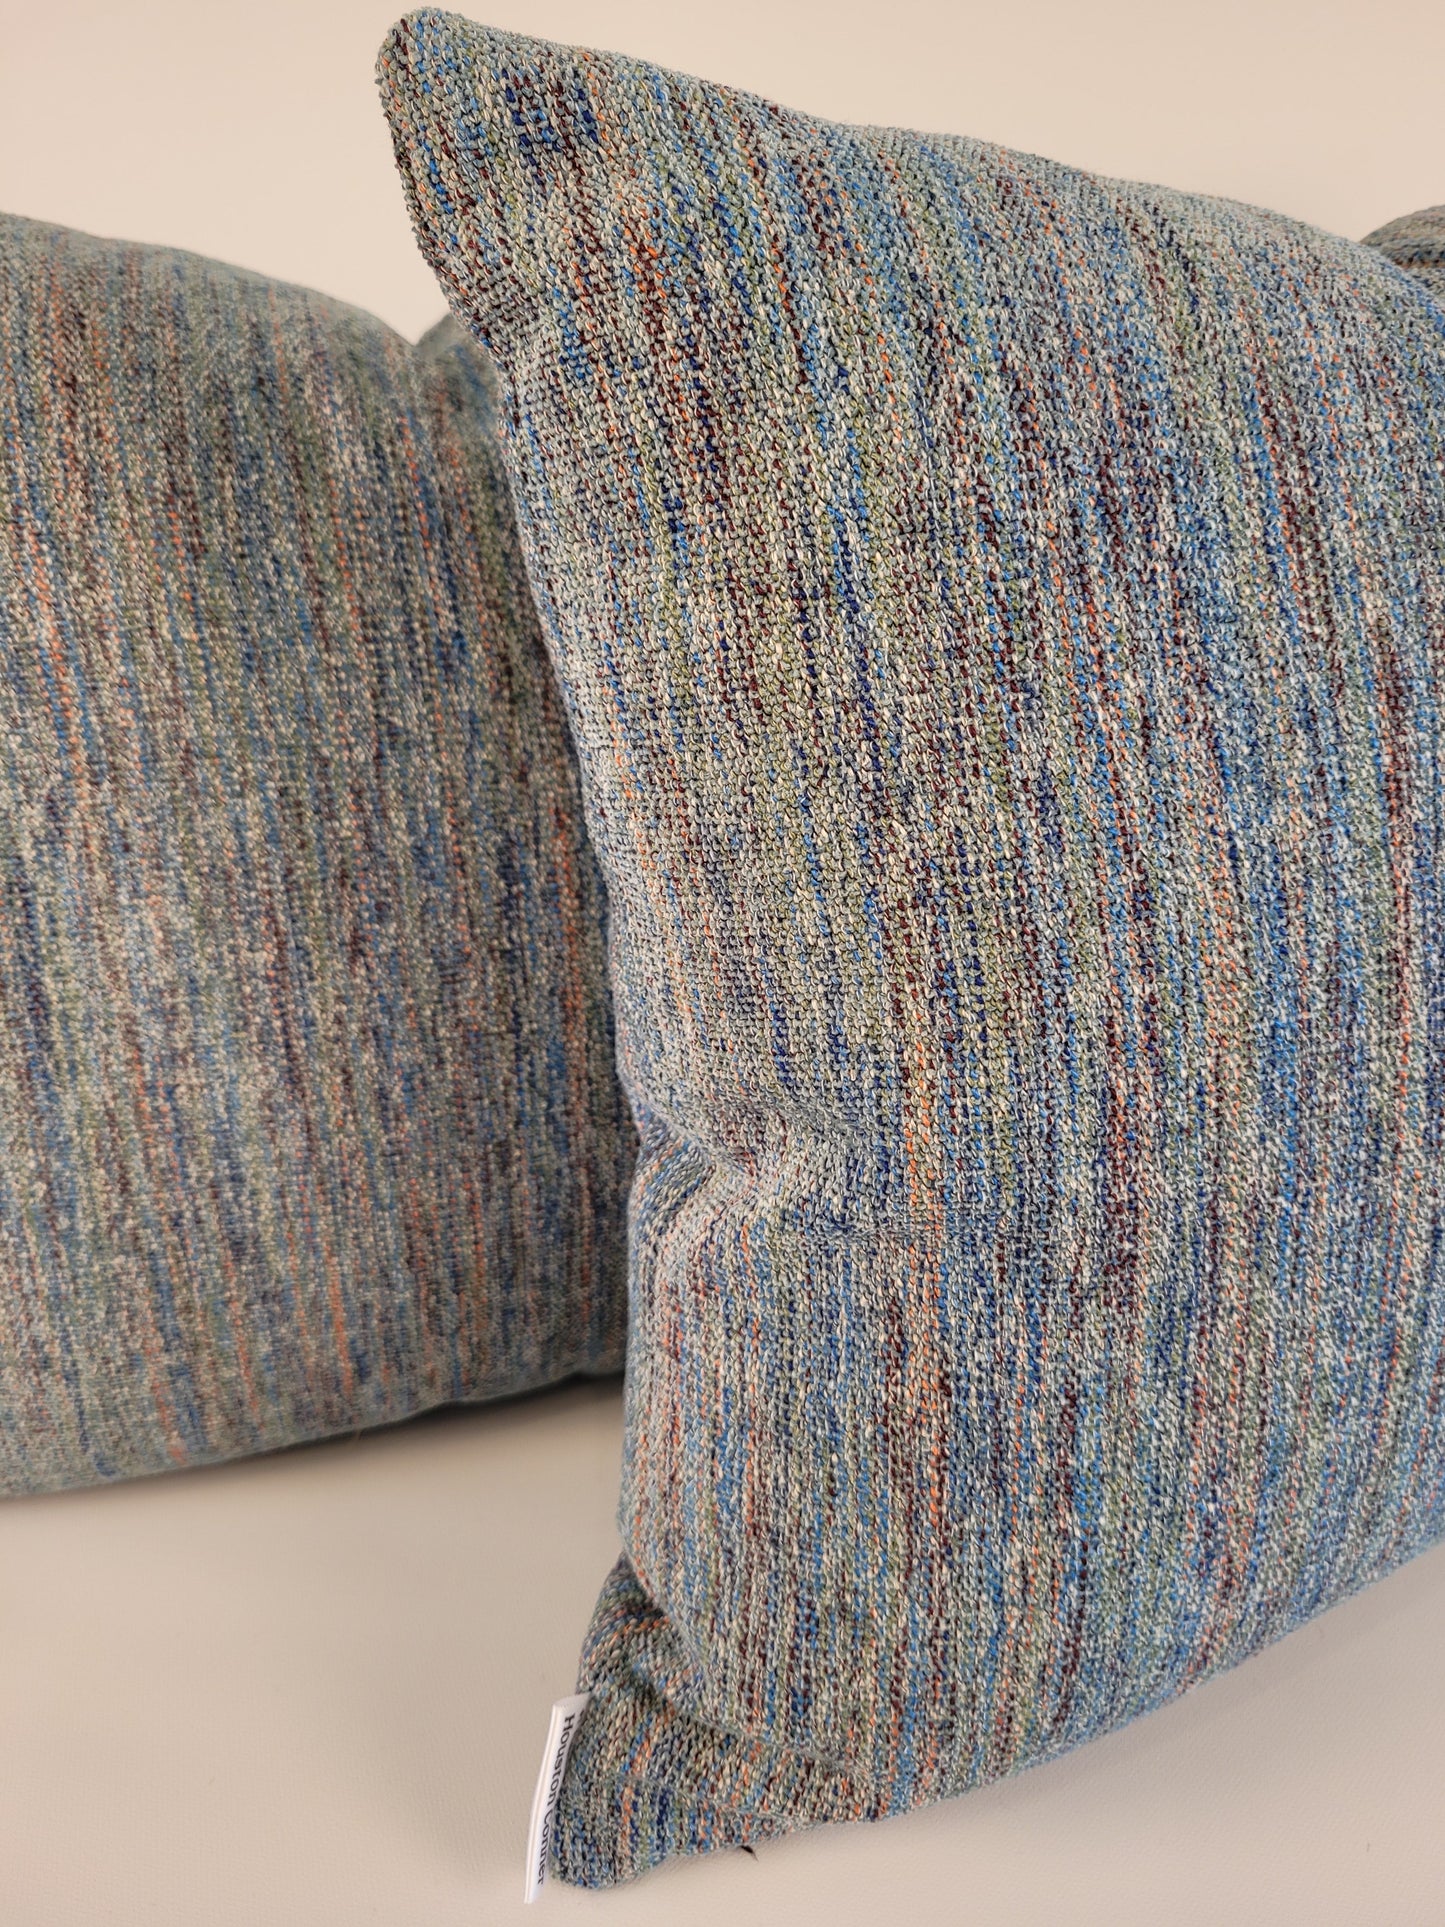 Turquoise Tweed Accent Pillow 16" poly insert 